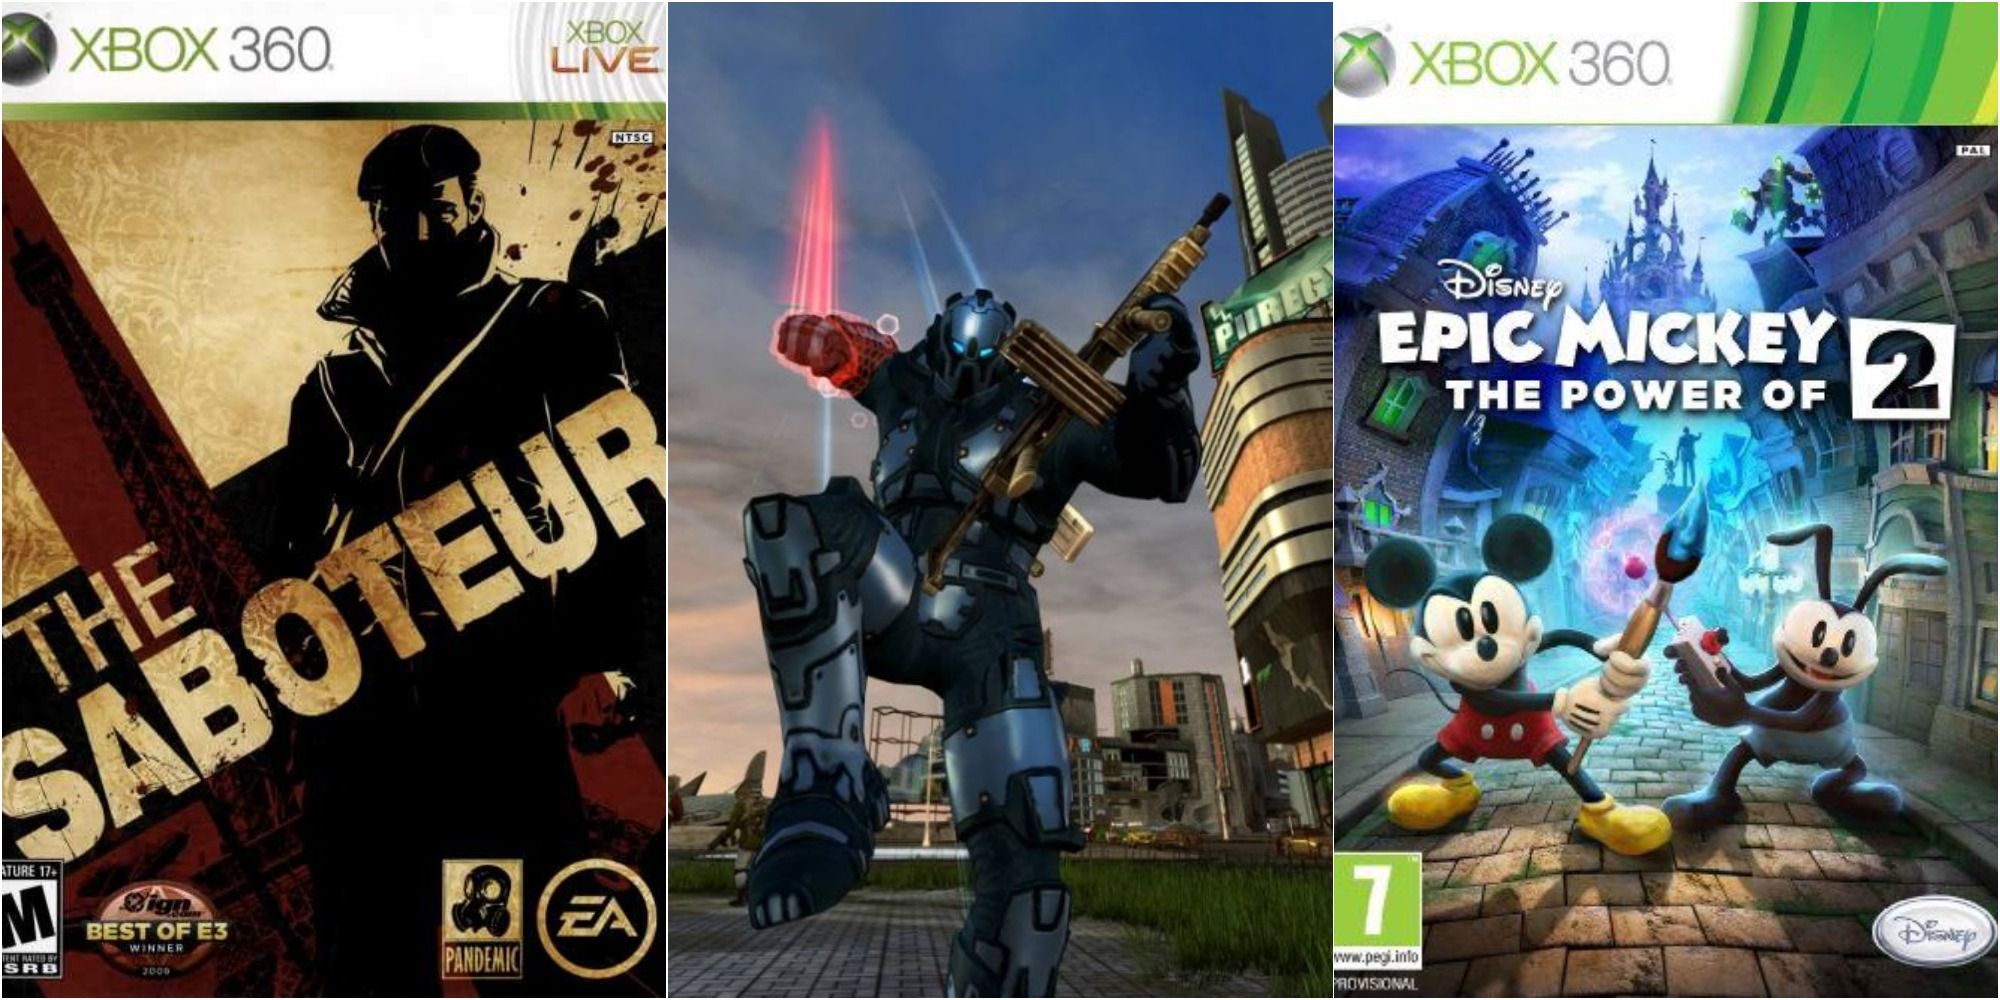 forgotten-xbox-360-games-that-have-awesome-cover-art